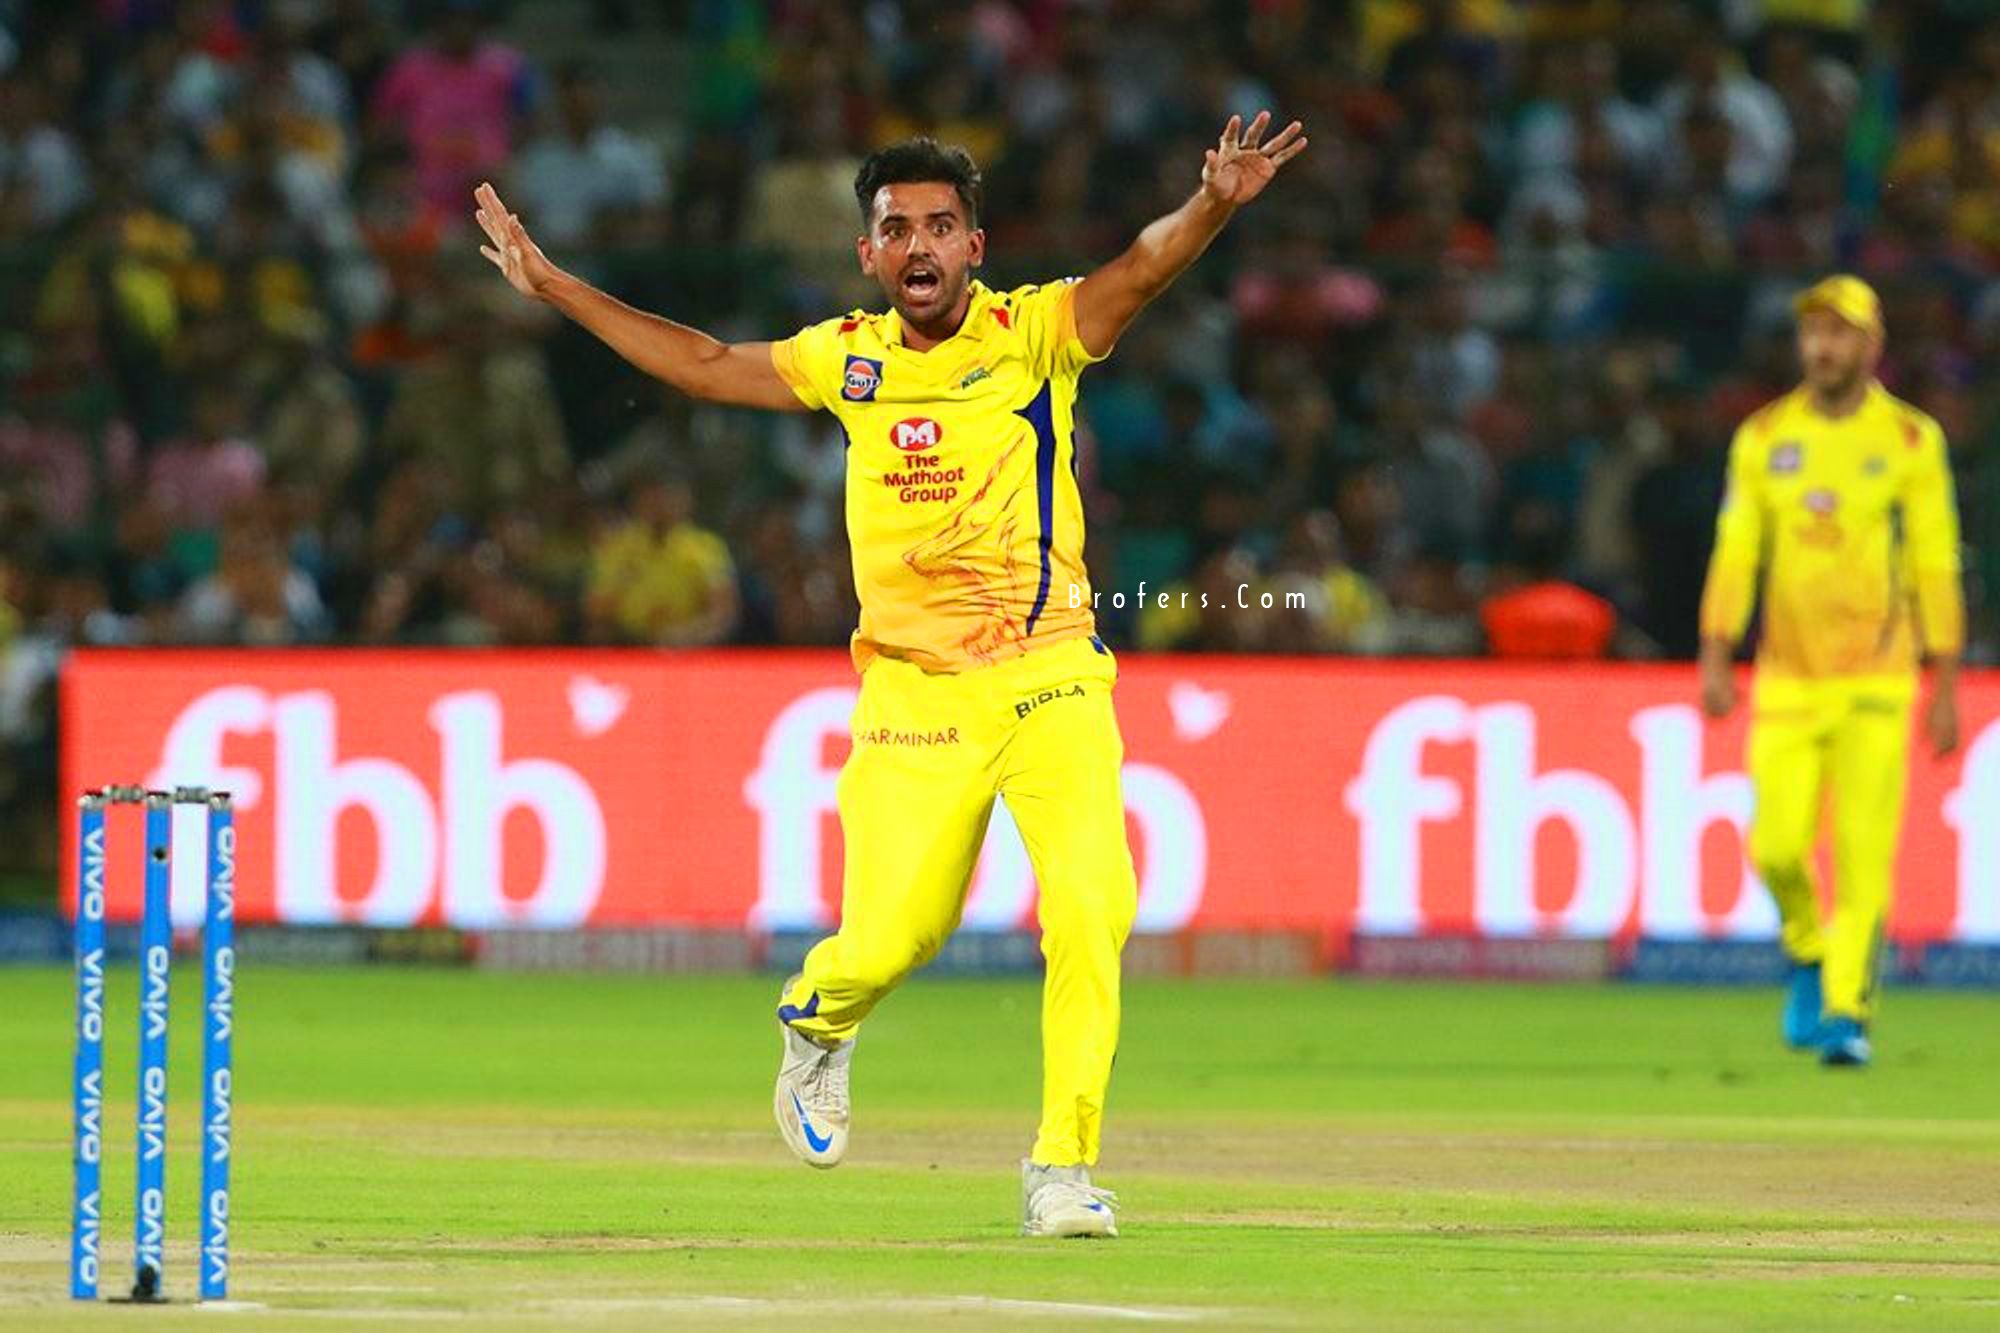 Deepak Chahar Odi, IPL And Test Match Cricket Picture, Image And Free Wallpaper